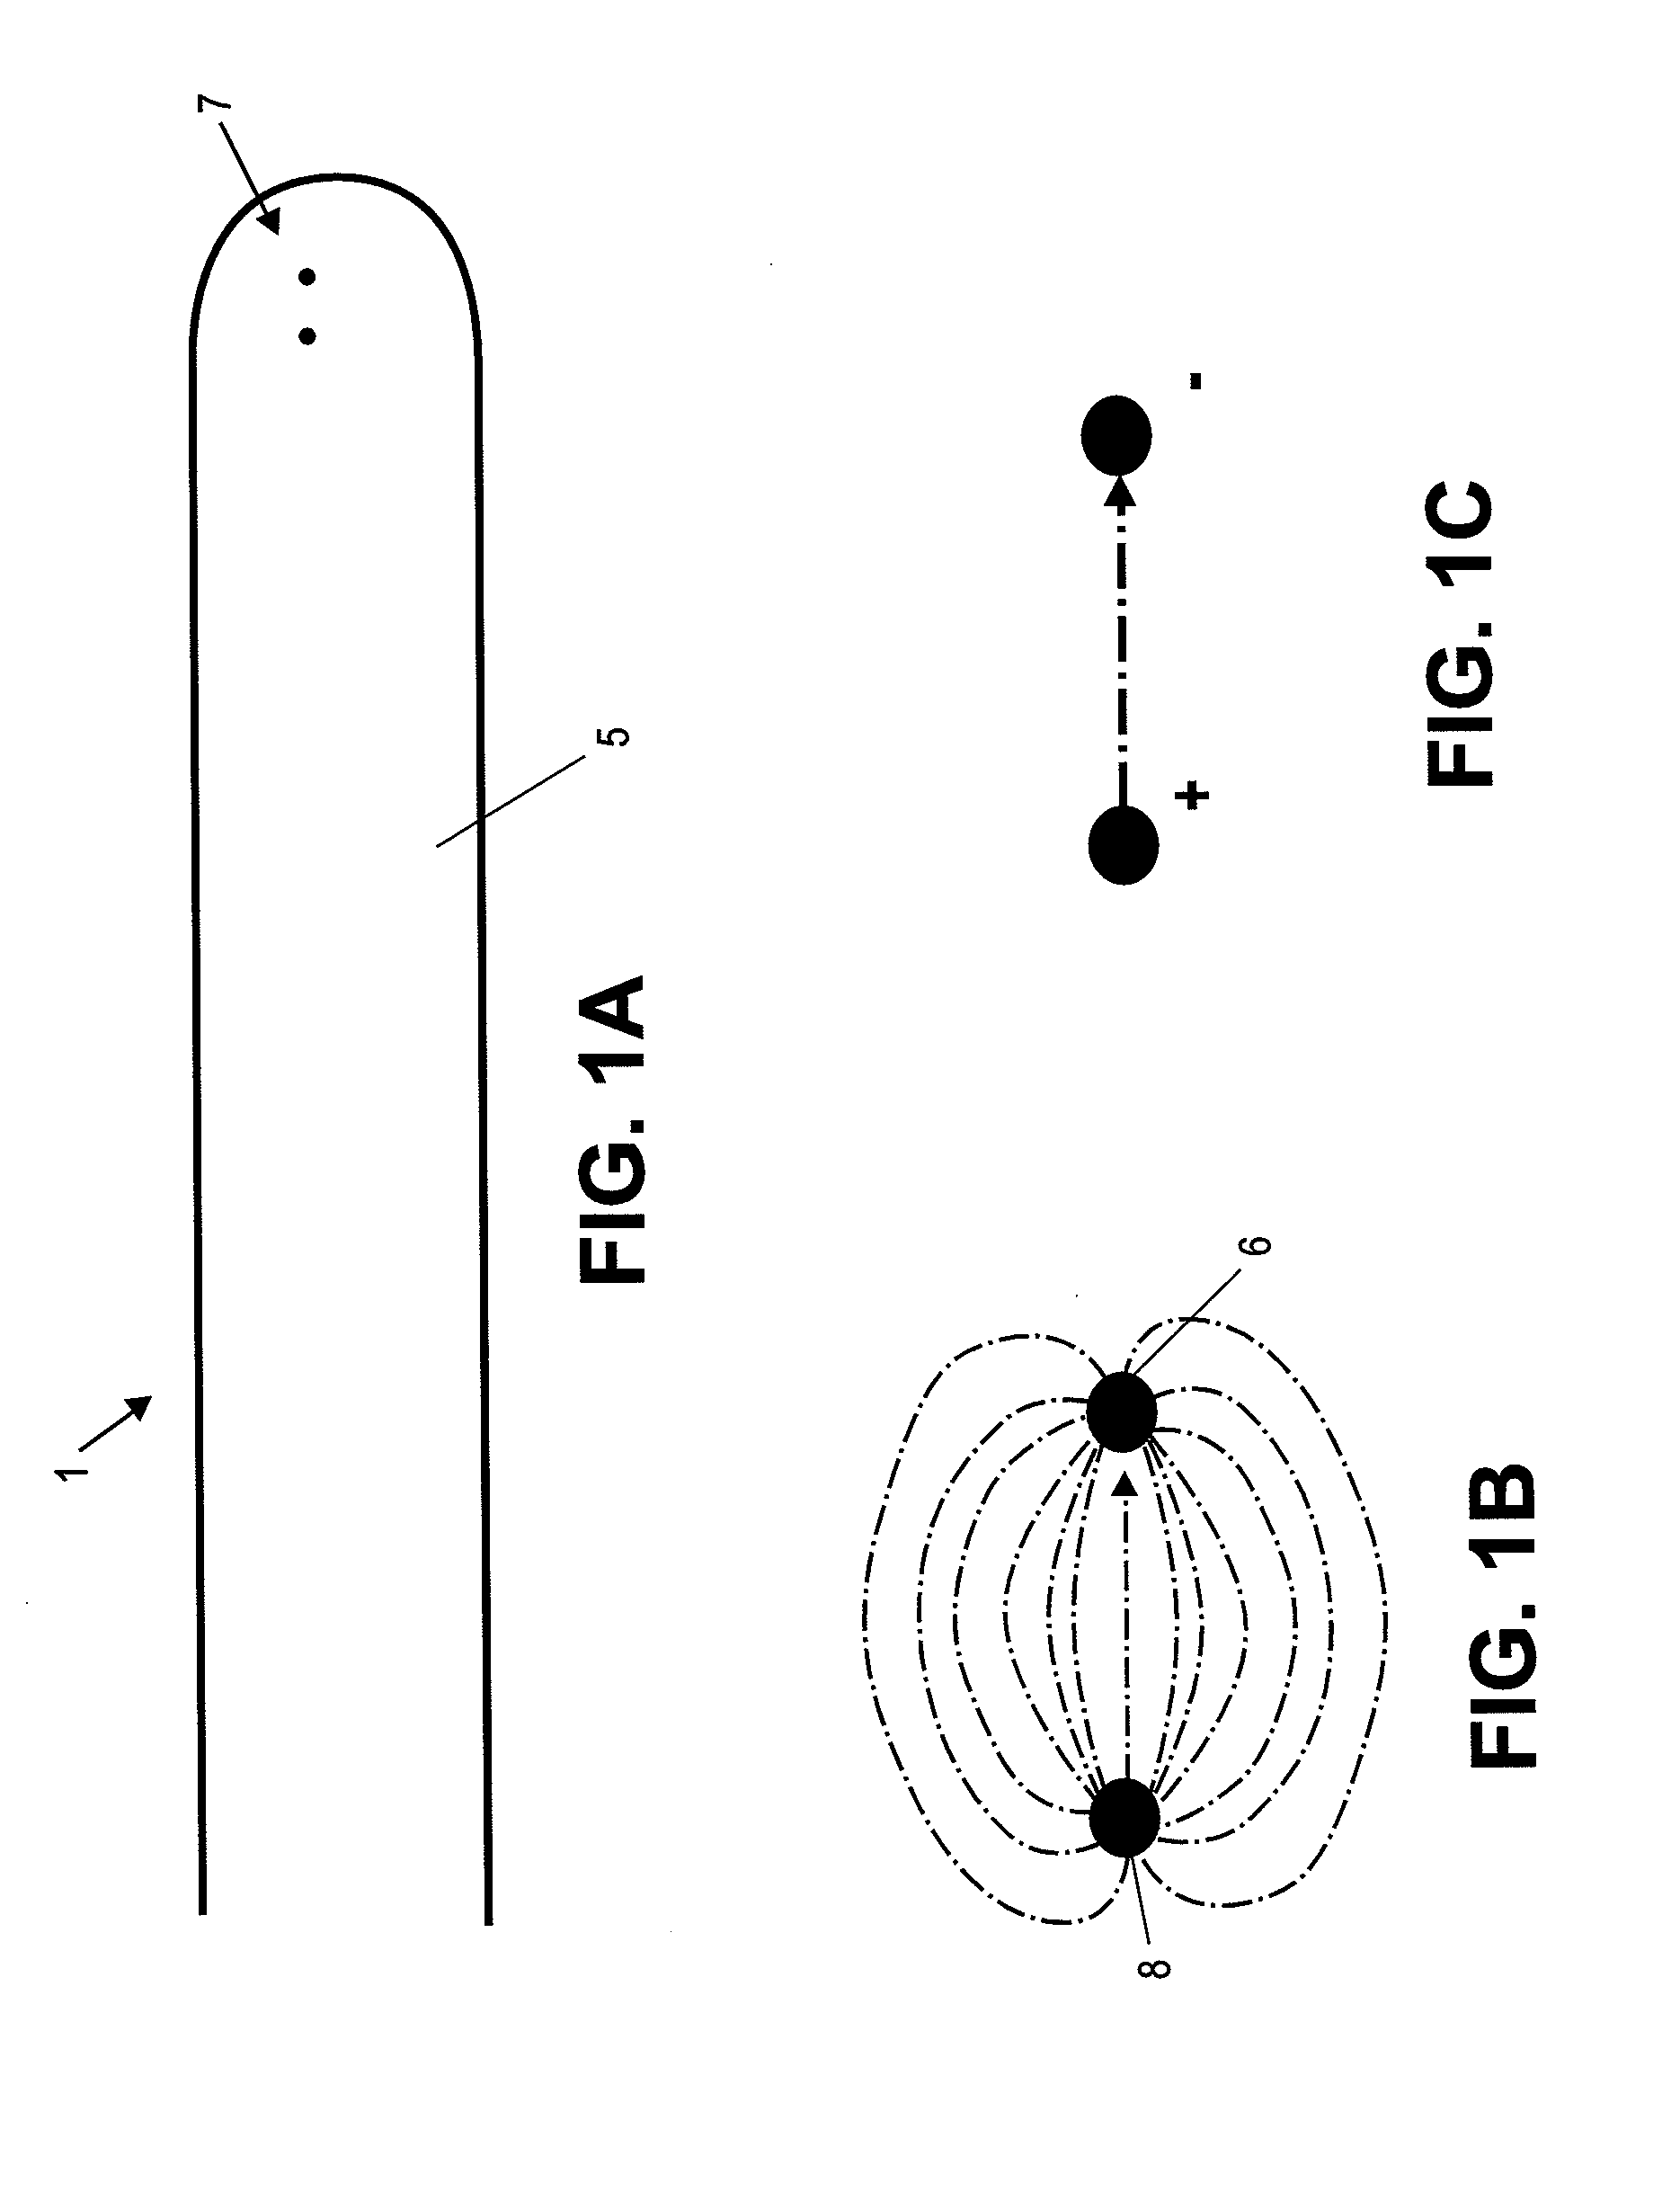 Devices, methods and systems for neural localization